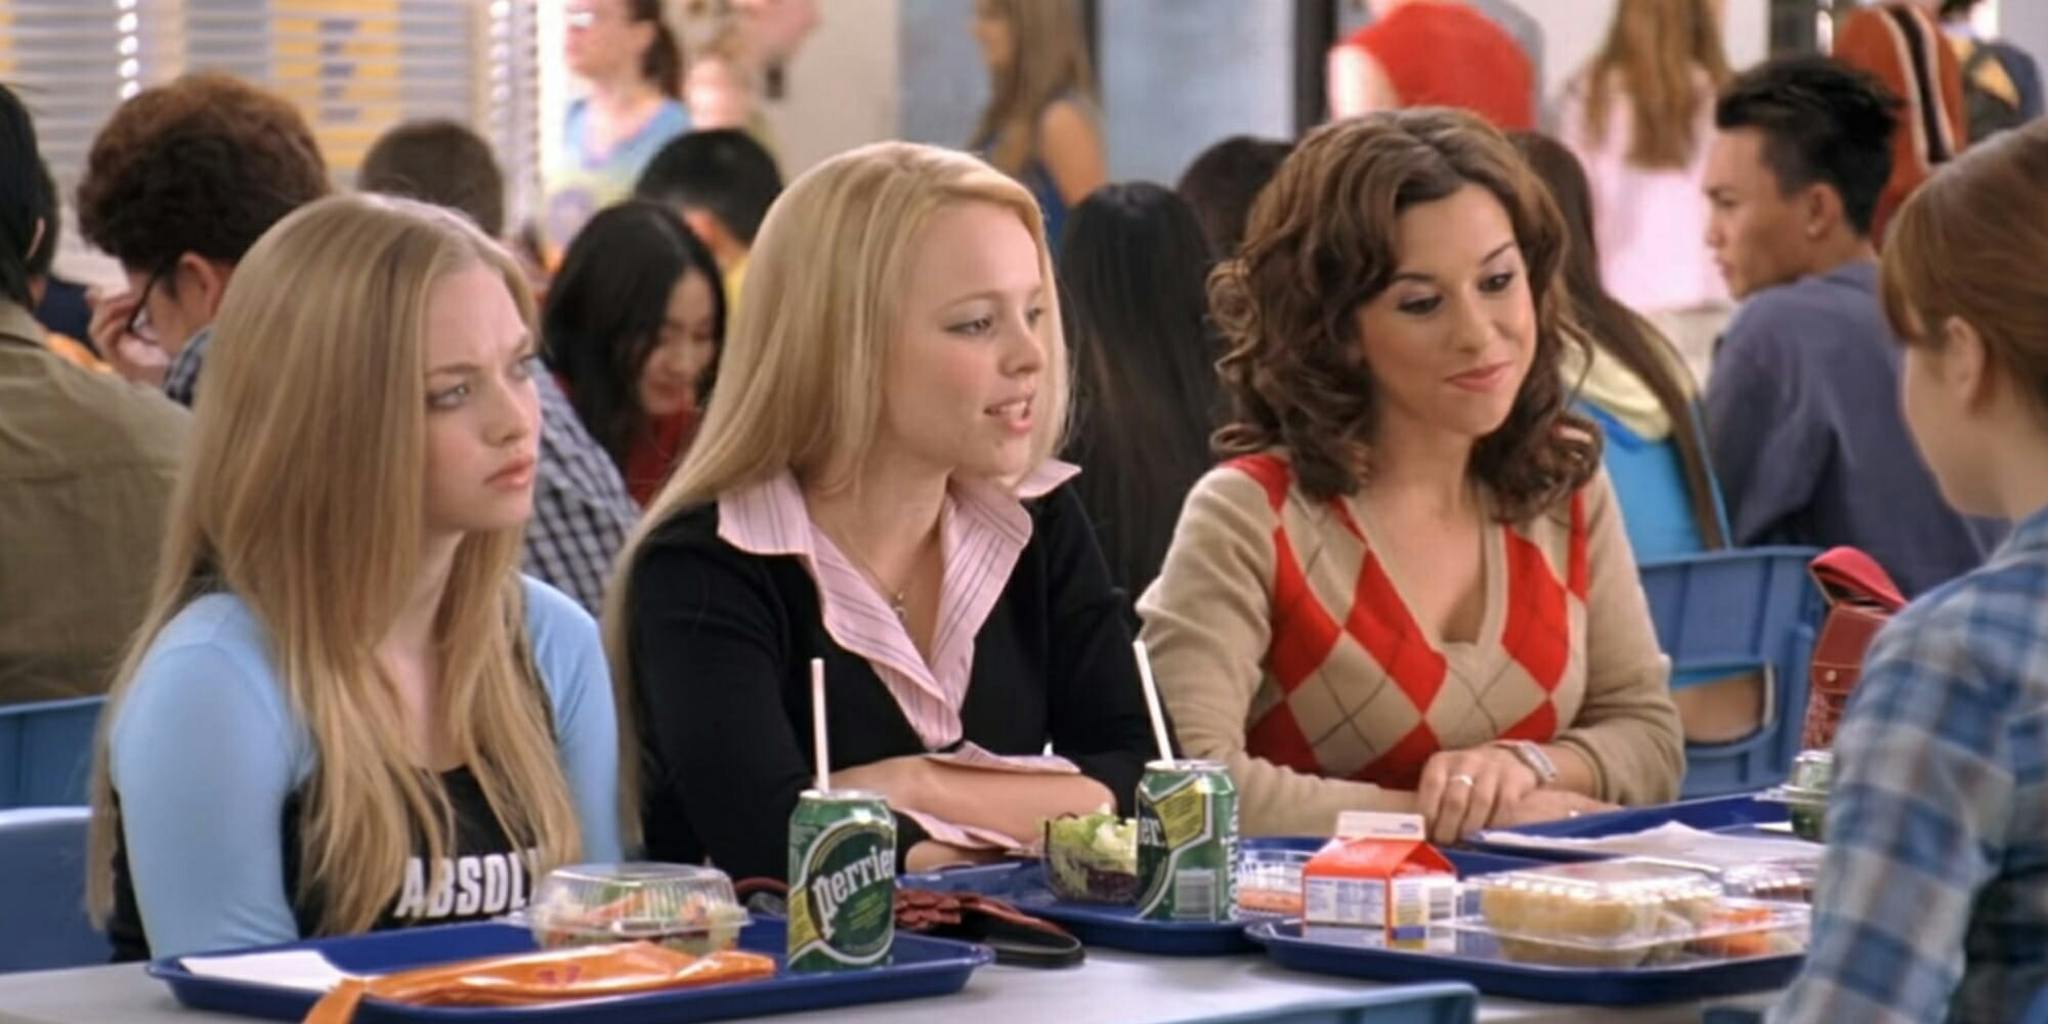 Mean Girls Day October 3 Is A Wednesday So Twitter Is Wearing Pink 